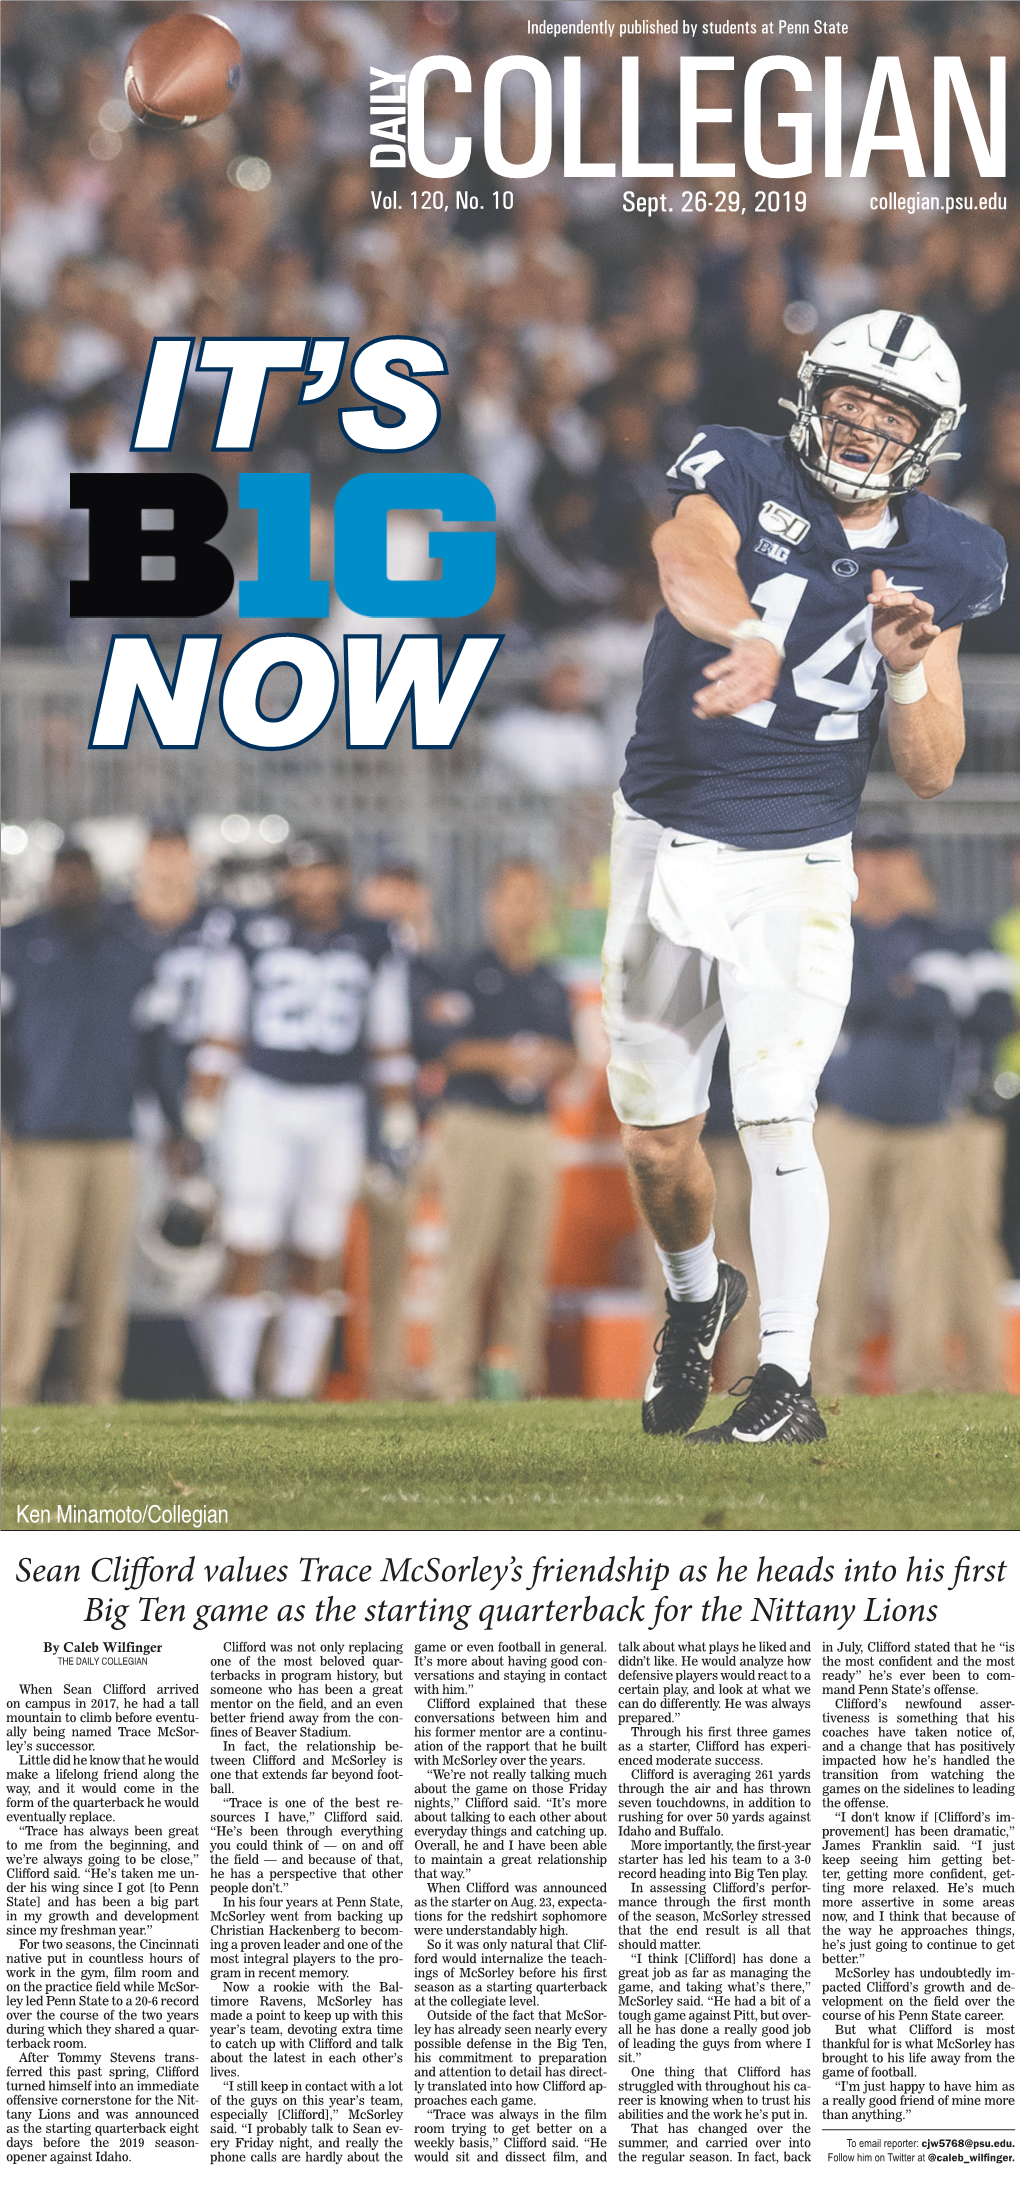 Sean Clifford Values Trace Mcsorley's Friendship As He Heads Into His First